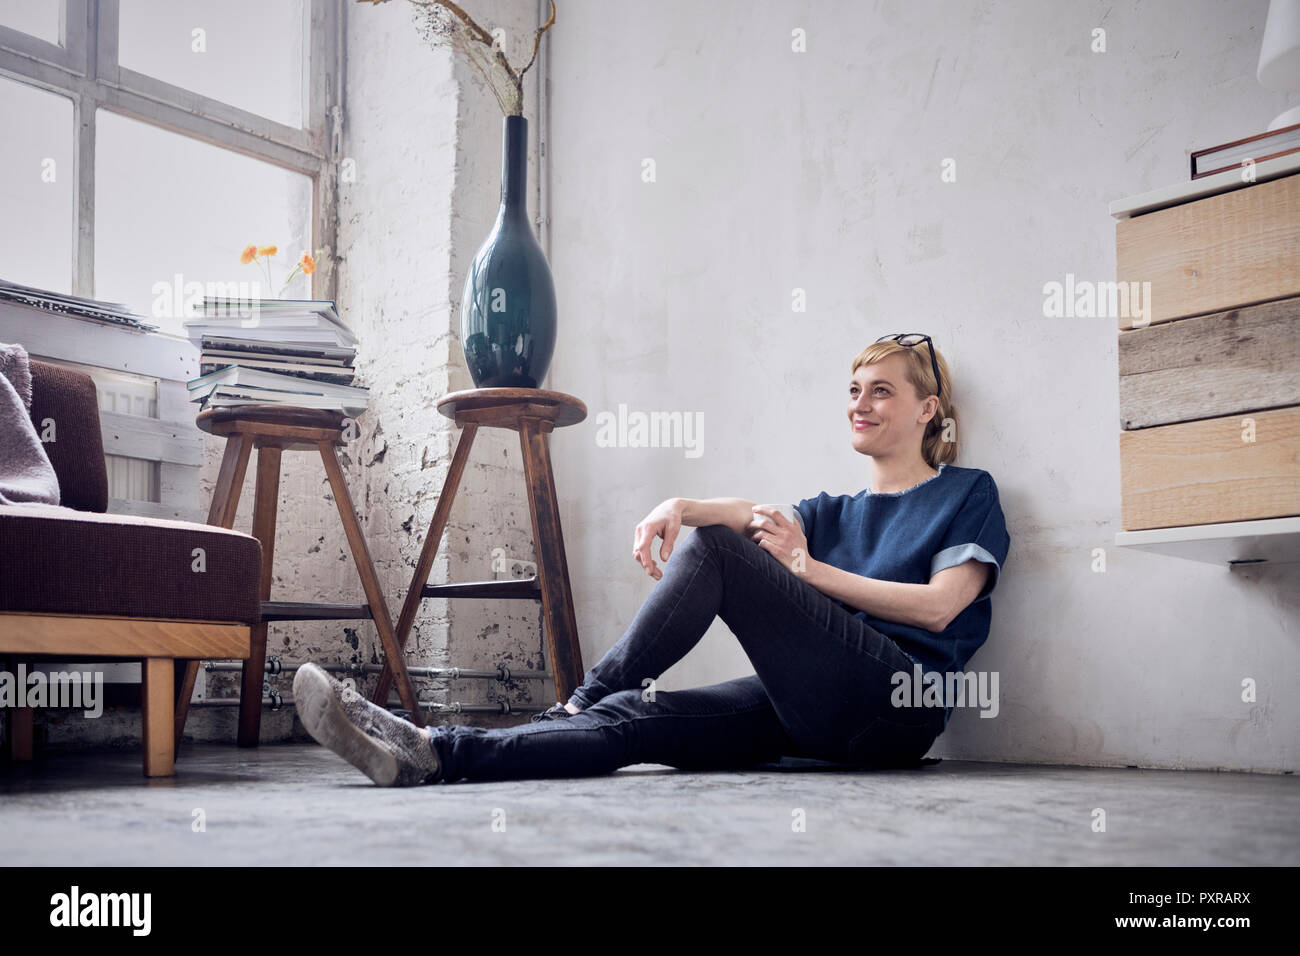 Smiling woman sitting on the floor in loft Stock Photo